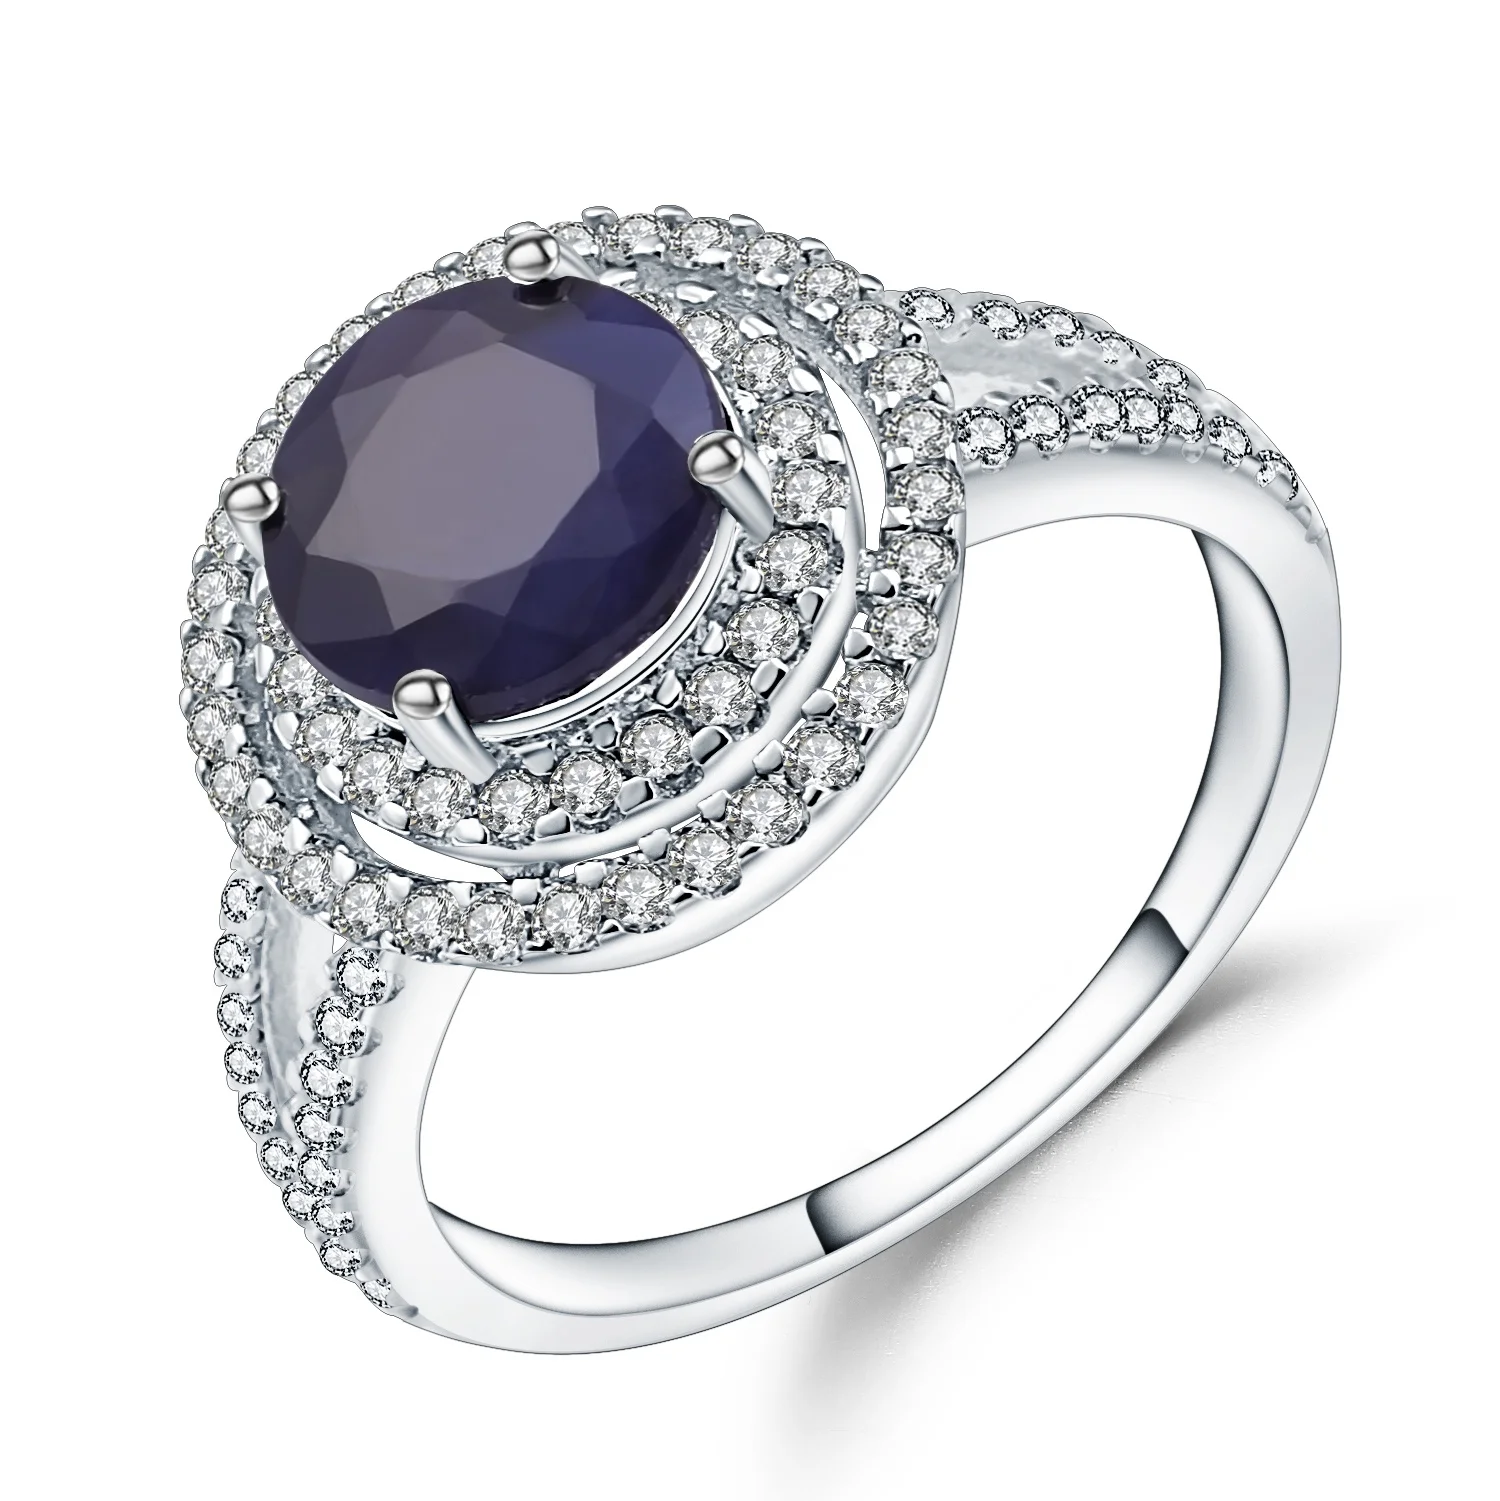 

Abiding Luxury Design 925 Sterling Silver Oval Blue Sapphire Wedding Ring With Zirconia Halo